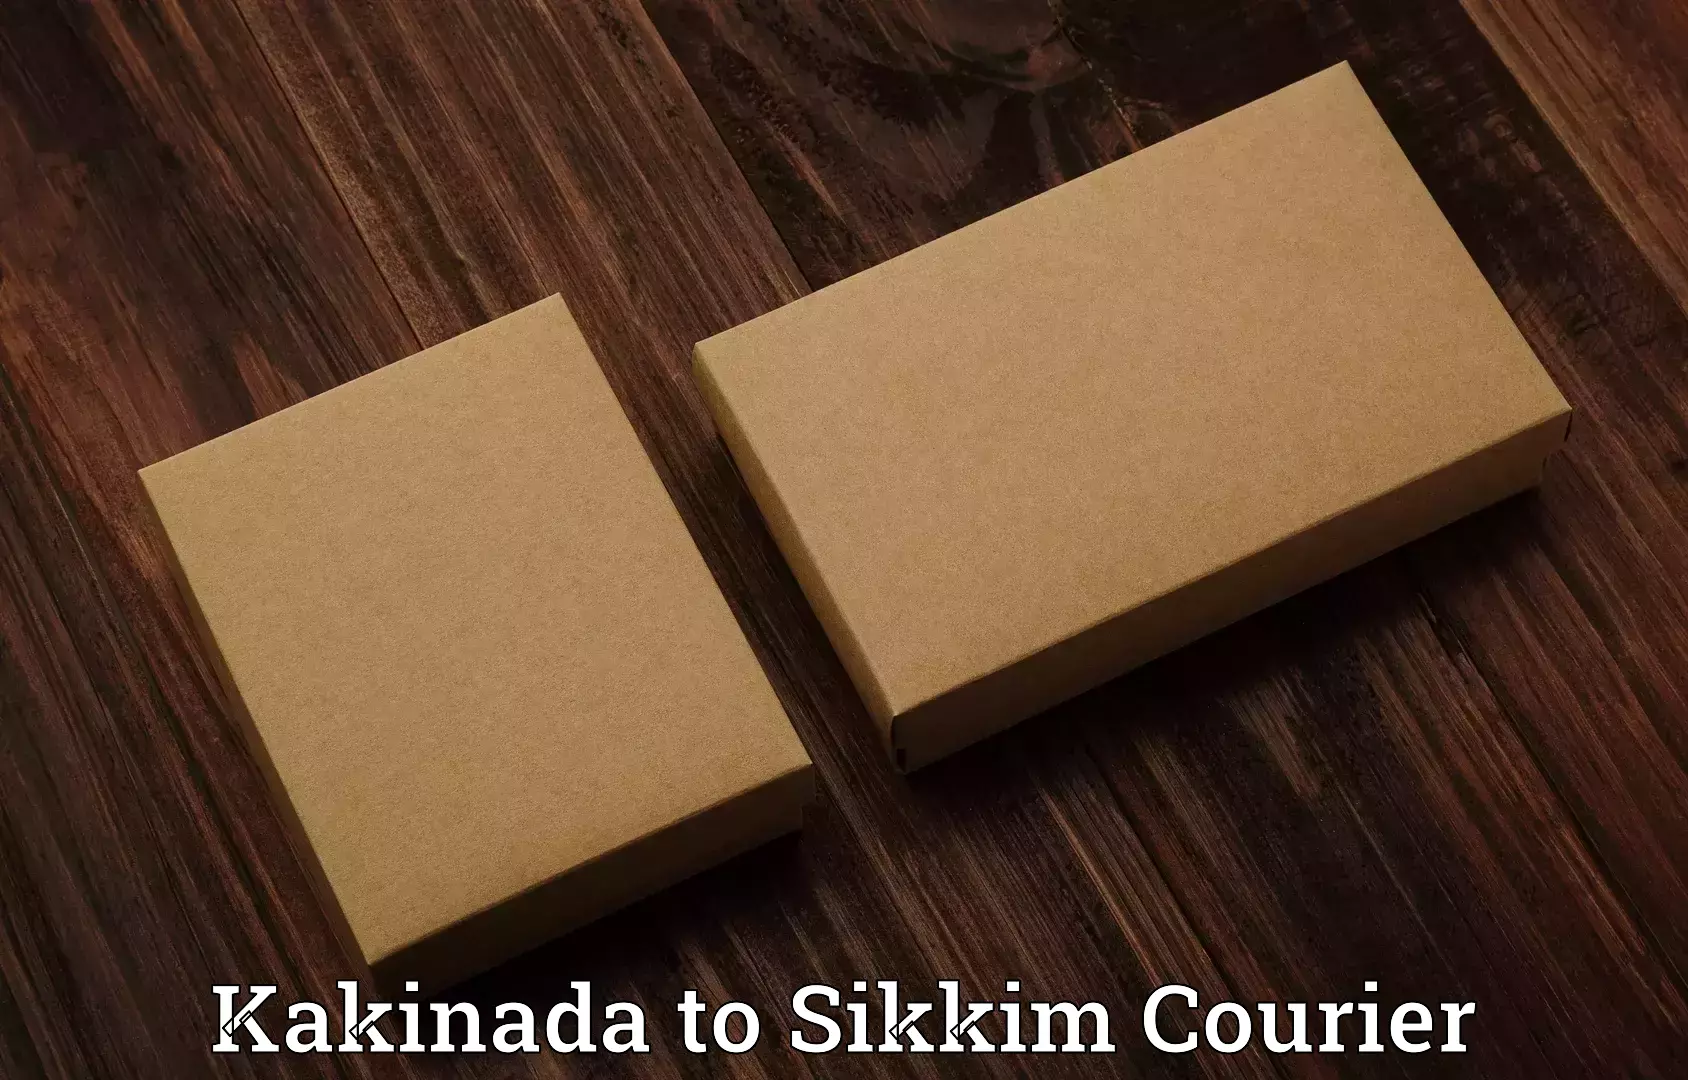 Personal effects shipping Kakinada to Pelling